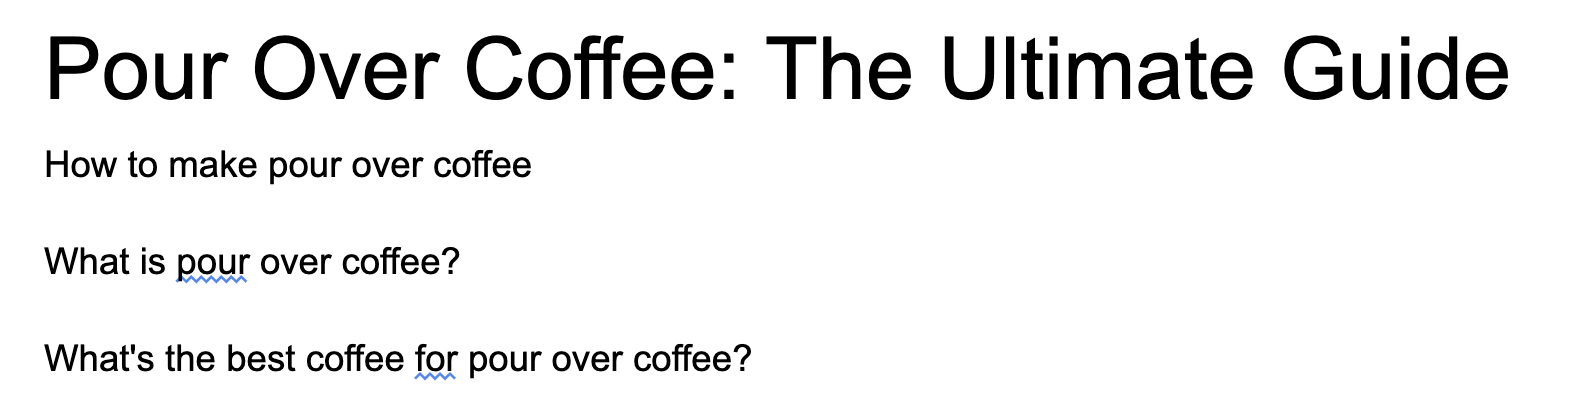 Initial outline for "pour-over coffee" article 